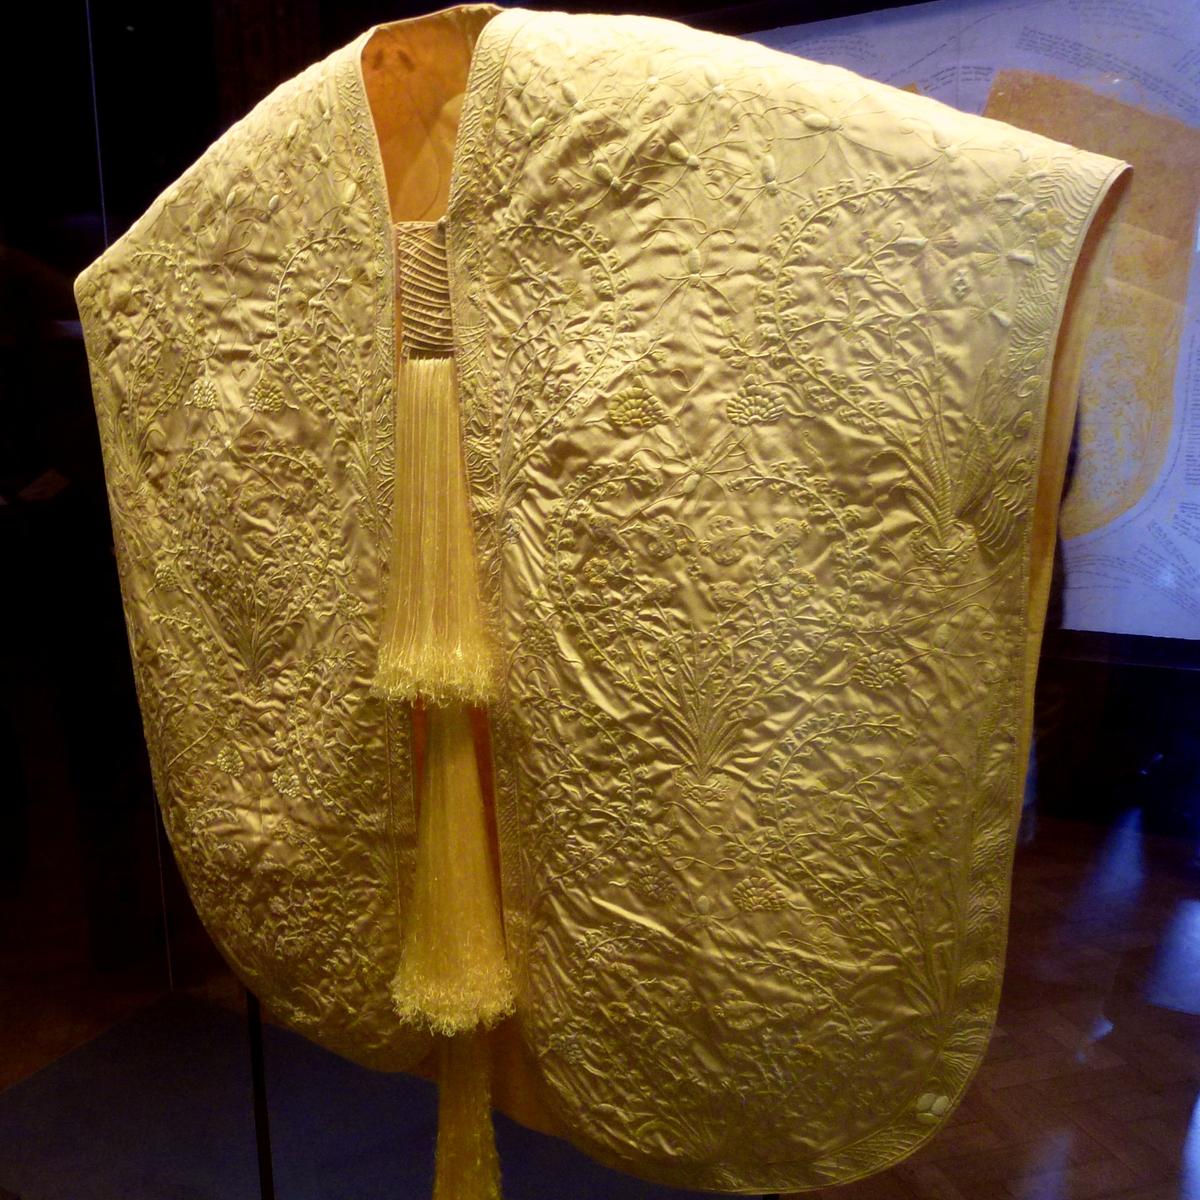 The cape on display at London's V&A Museum in June 2012 (Cmglee/CC BY-SA 3.0)